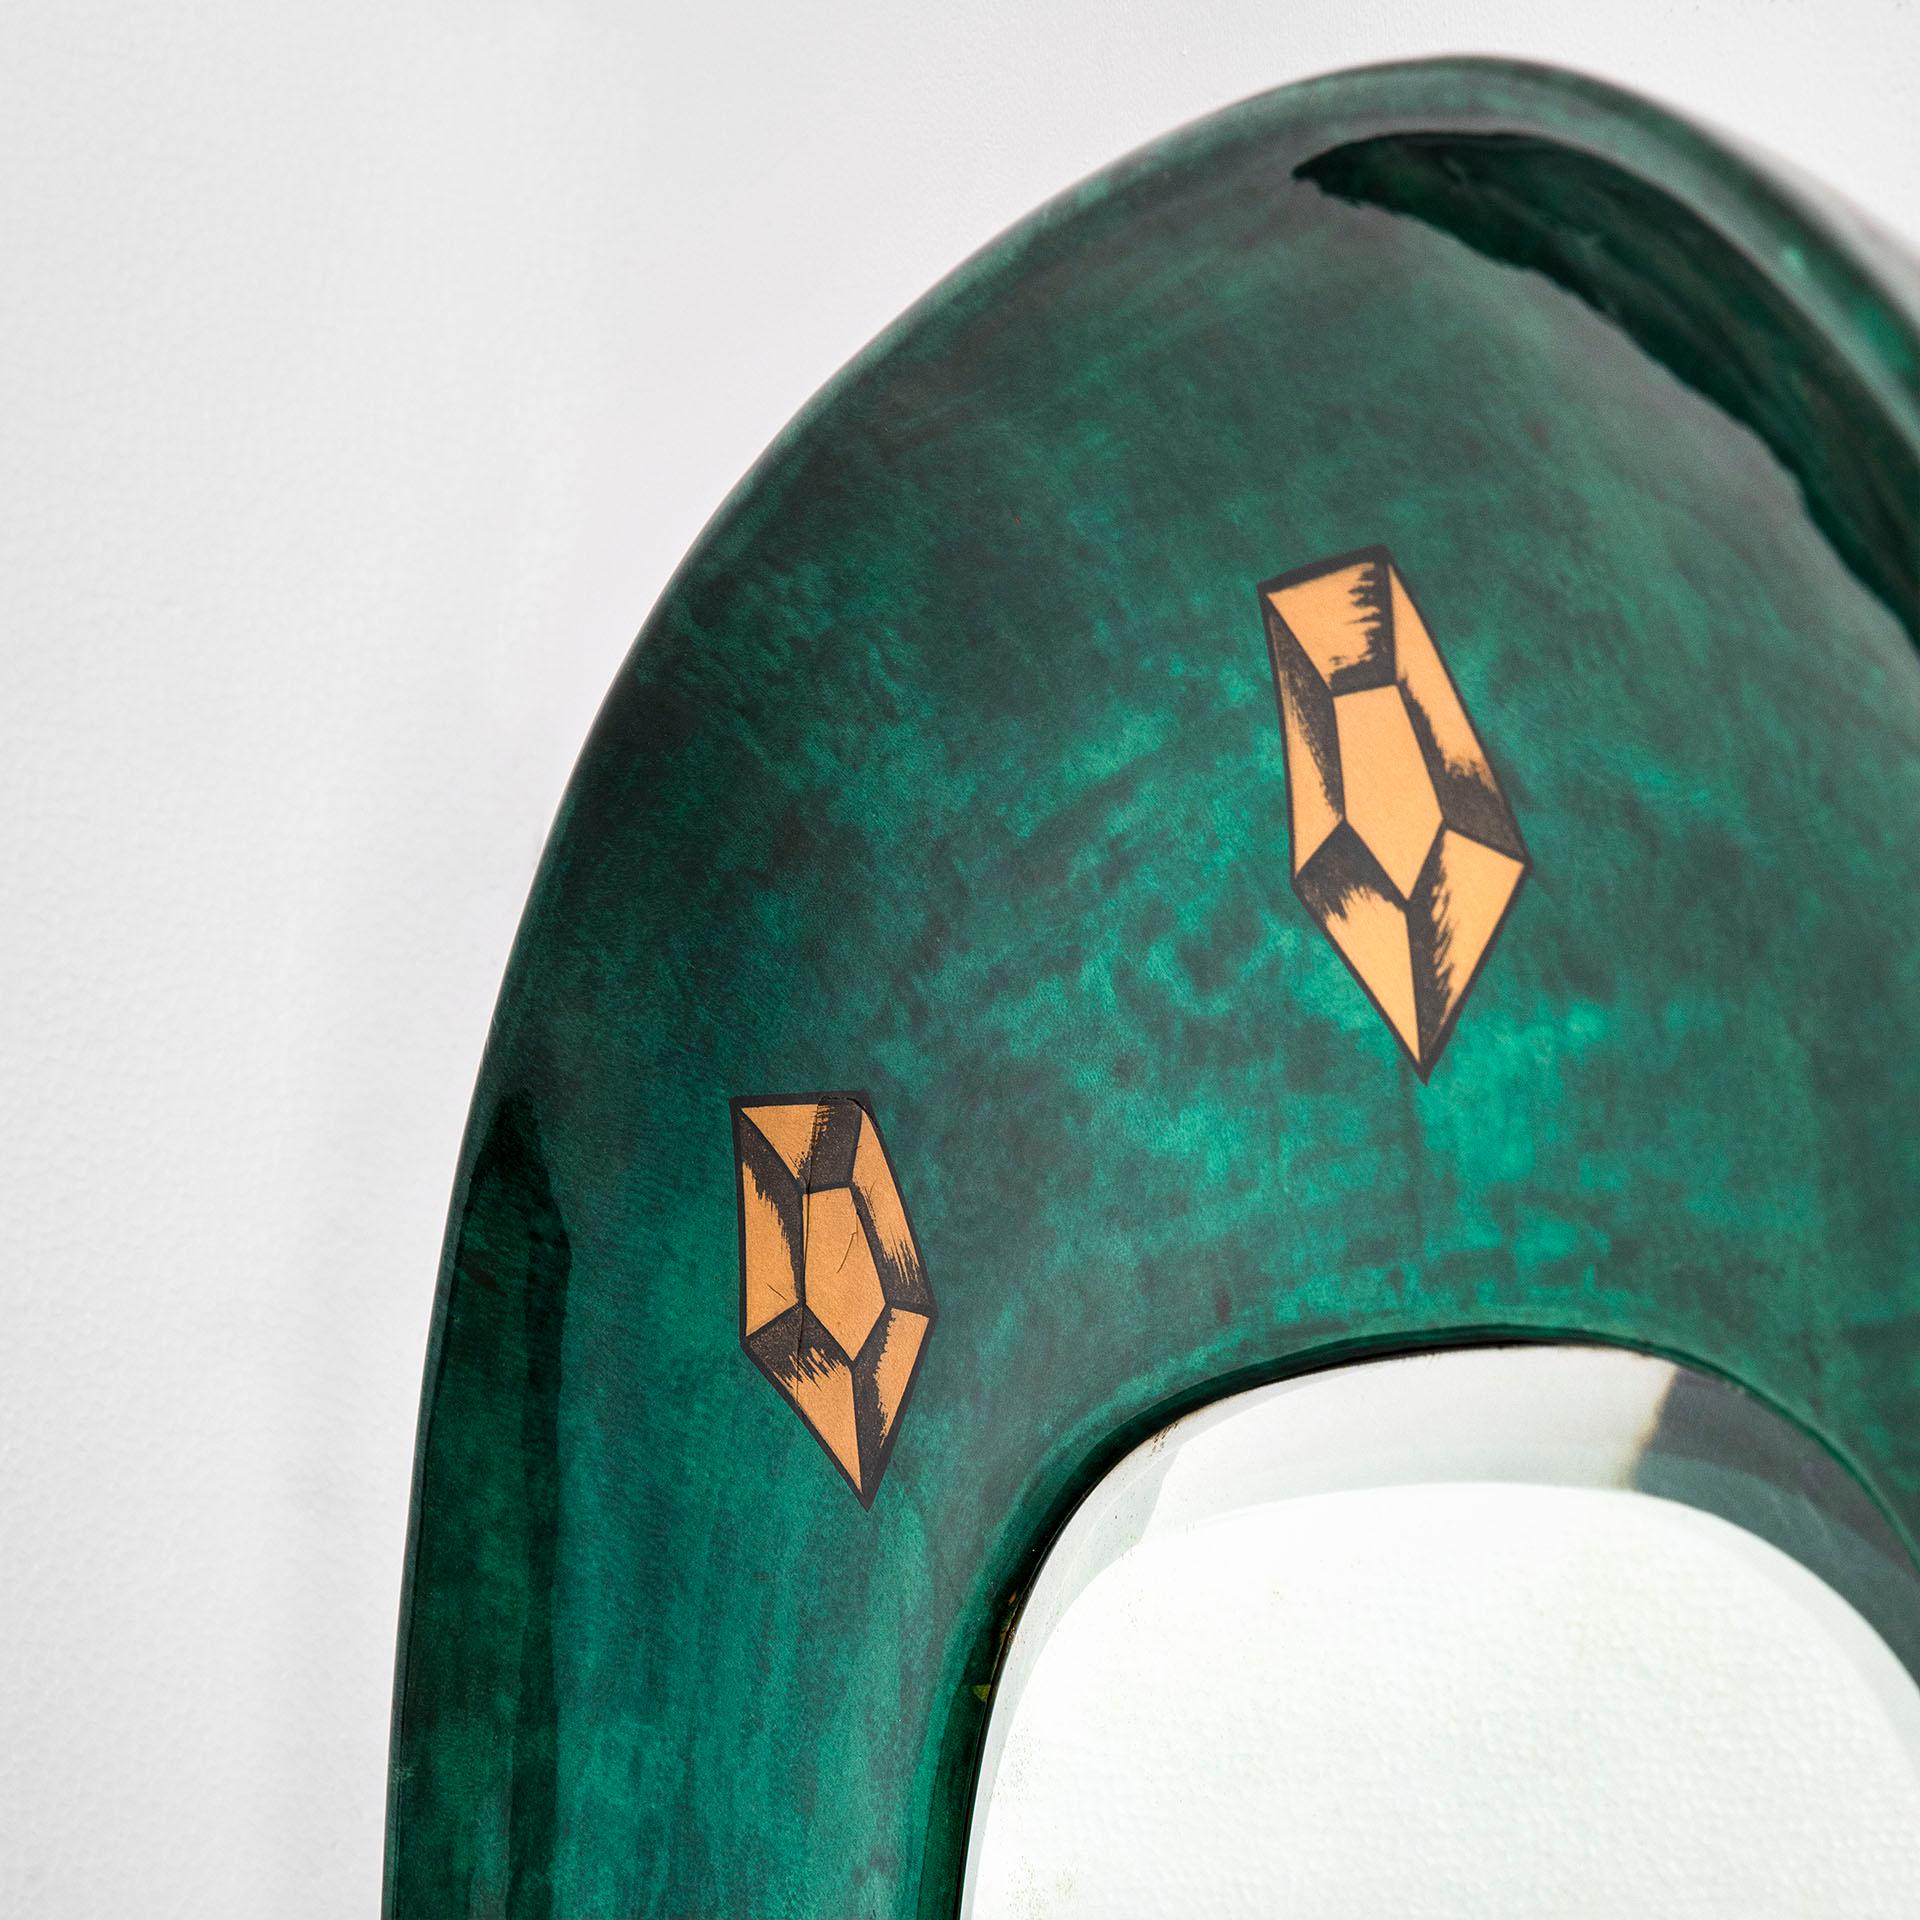 20th Century Aldo Tura Wall Mirror with Resin Coat, Wood and Paper Motifs, 1950s For Sale 1